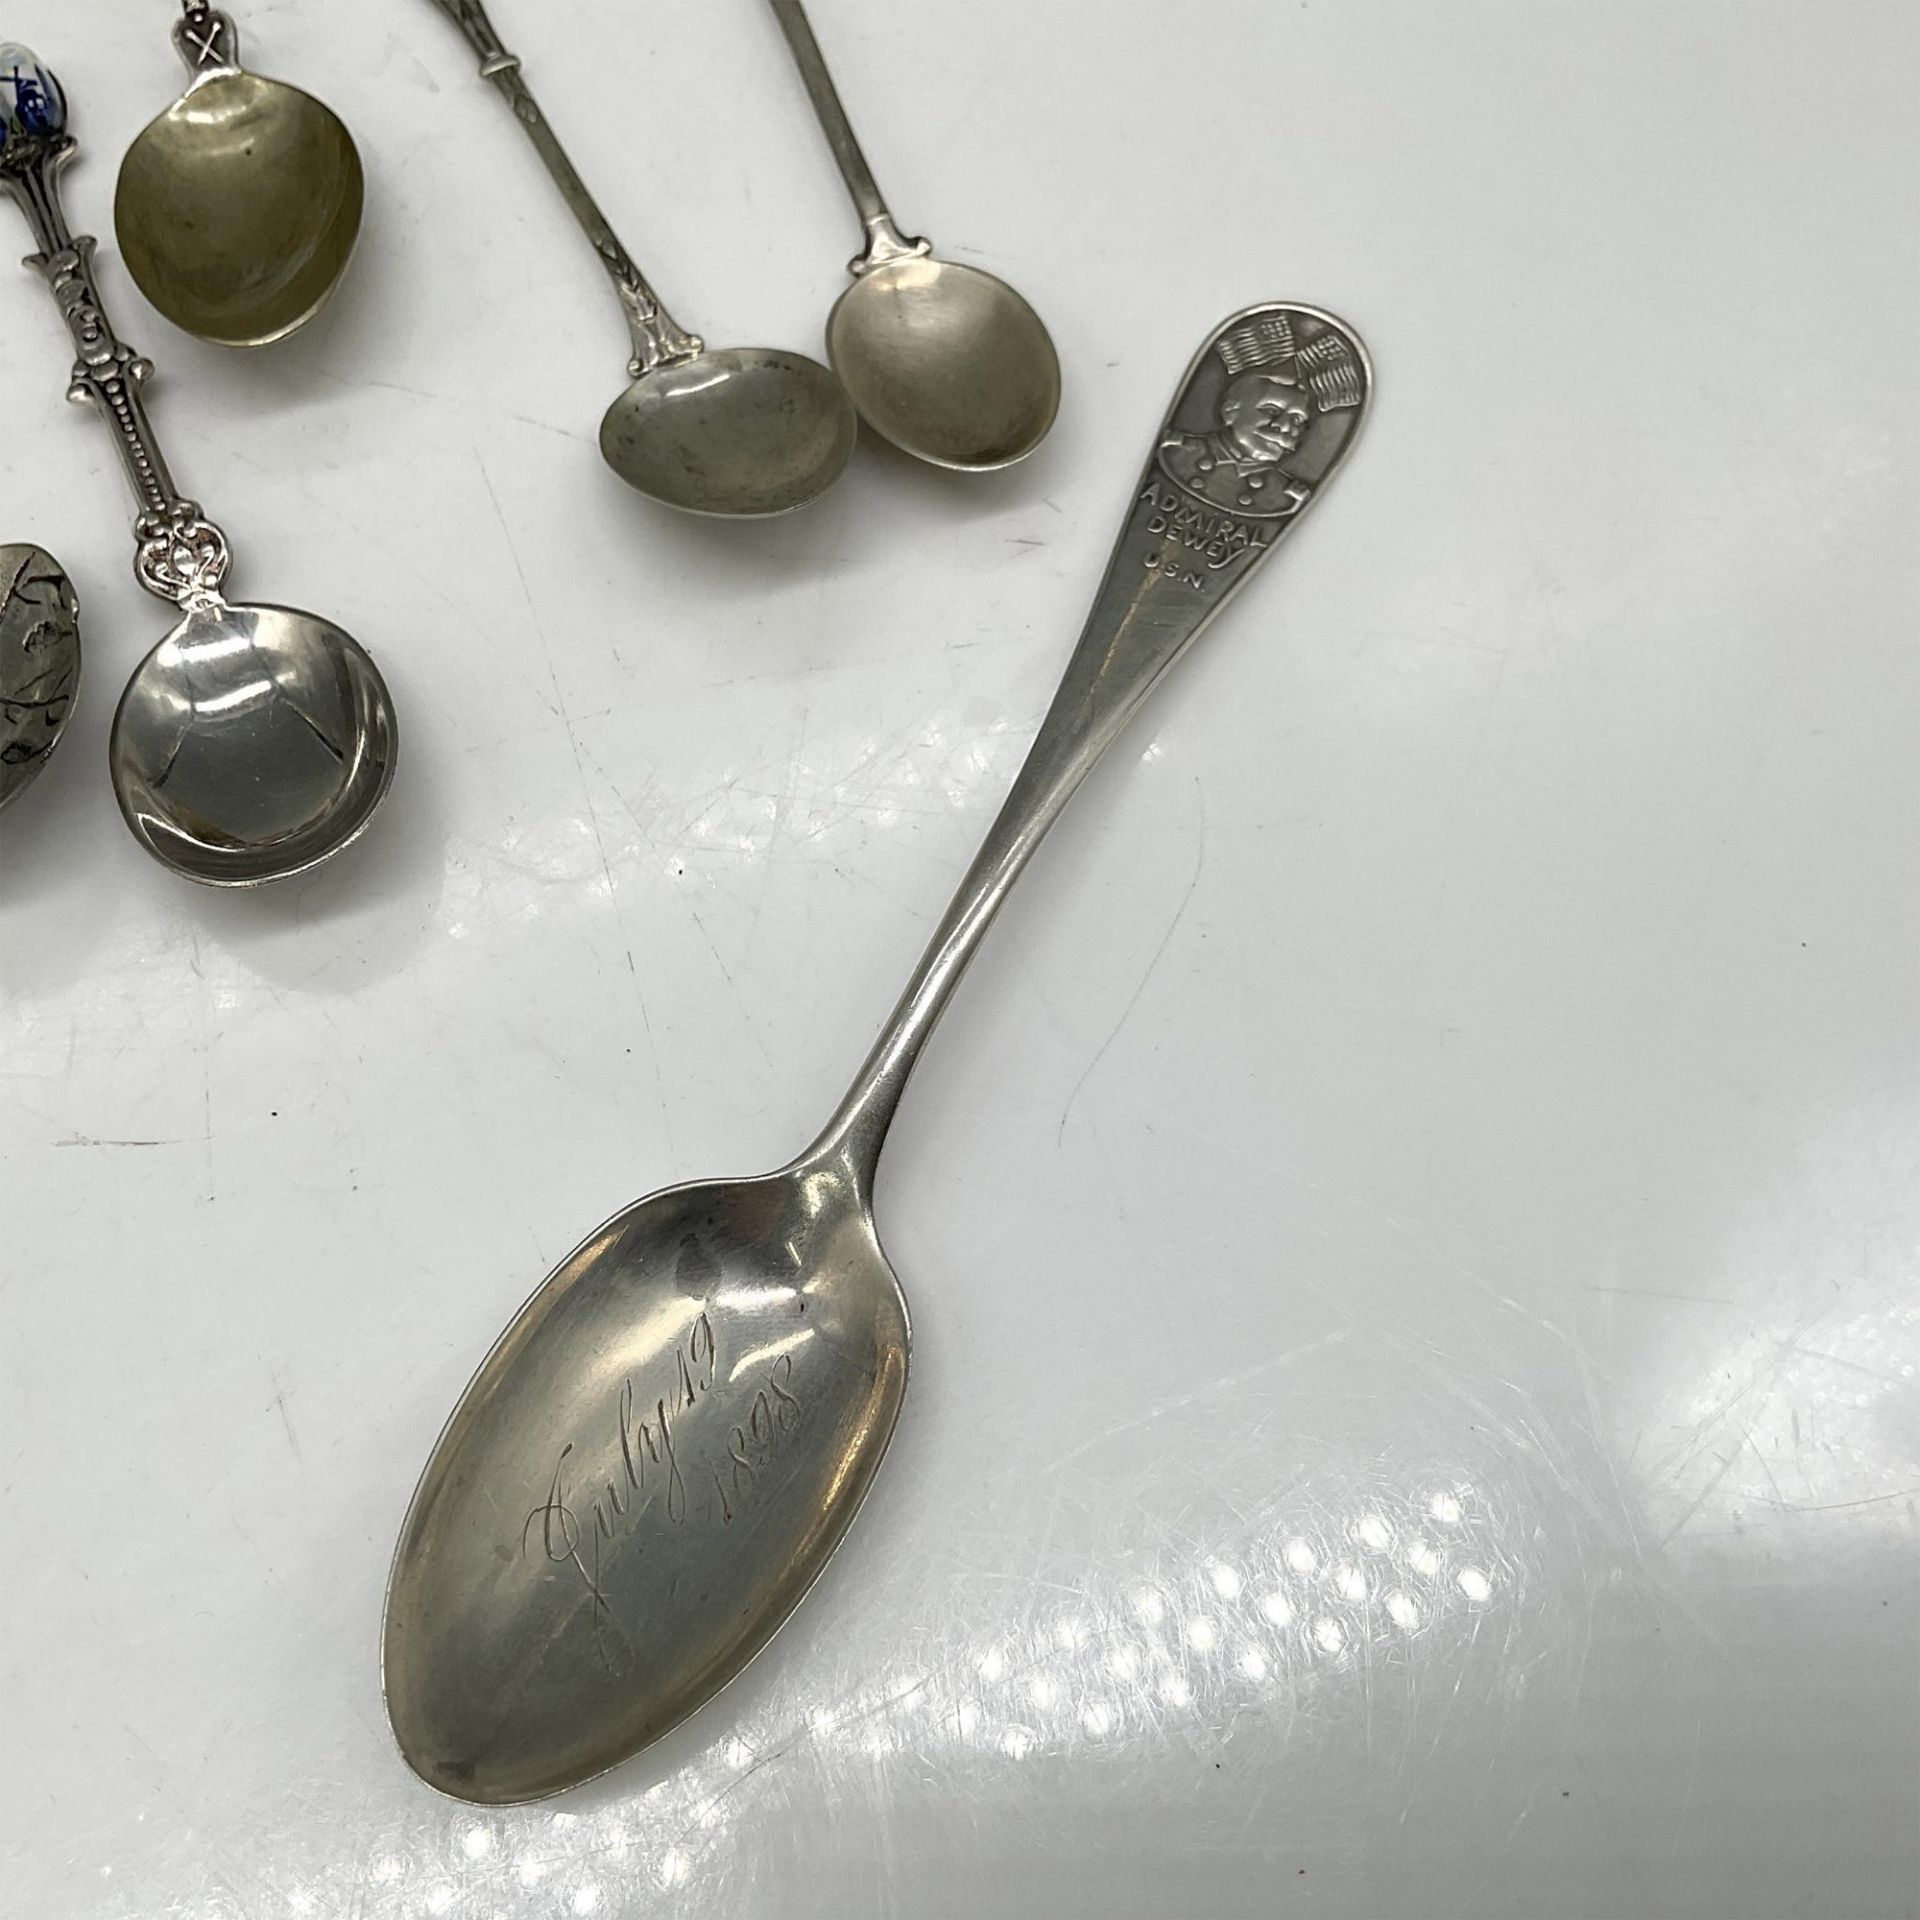 20pc Vintage Collectible Sterling + Silver Souvenir Spoons - Image 4 of 5